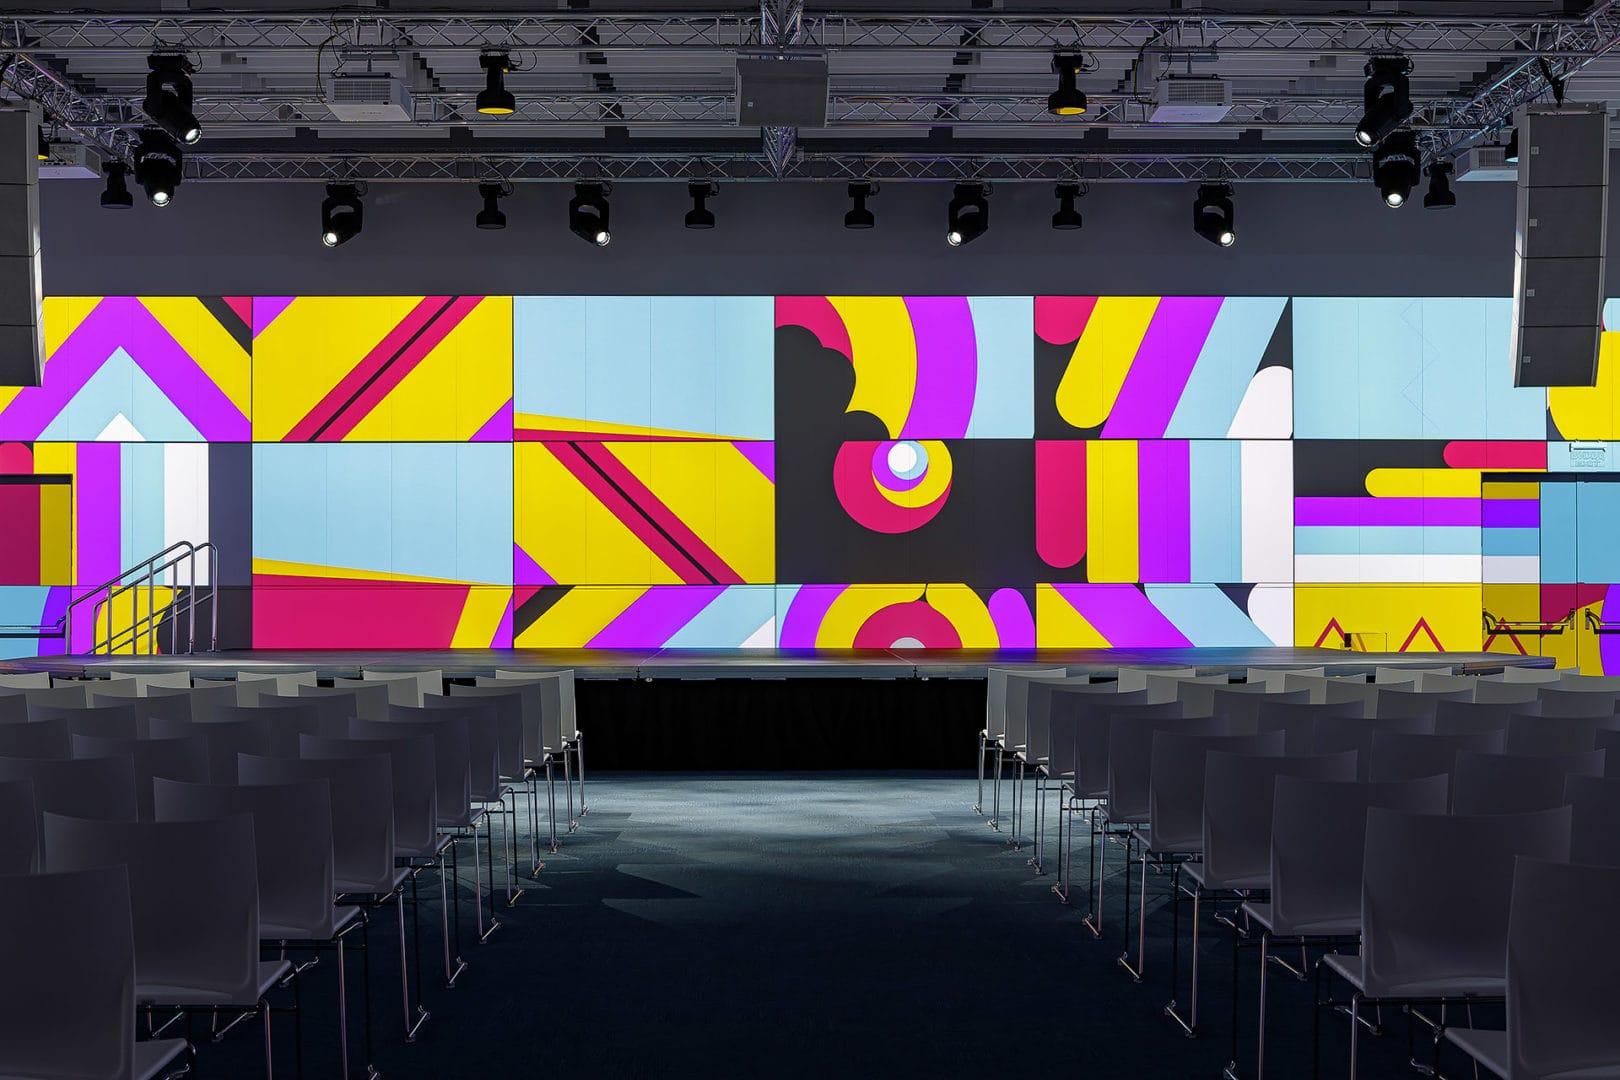 An event venue boasting a 270-degree panoramic projection powered by a Screenberry media server